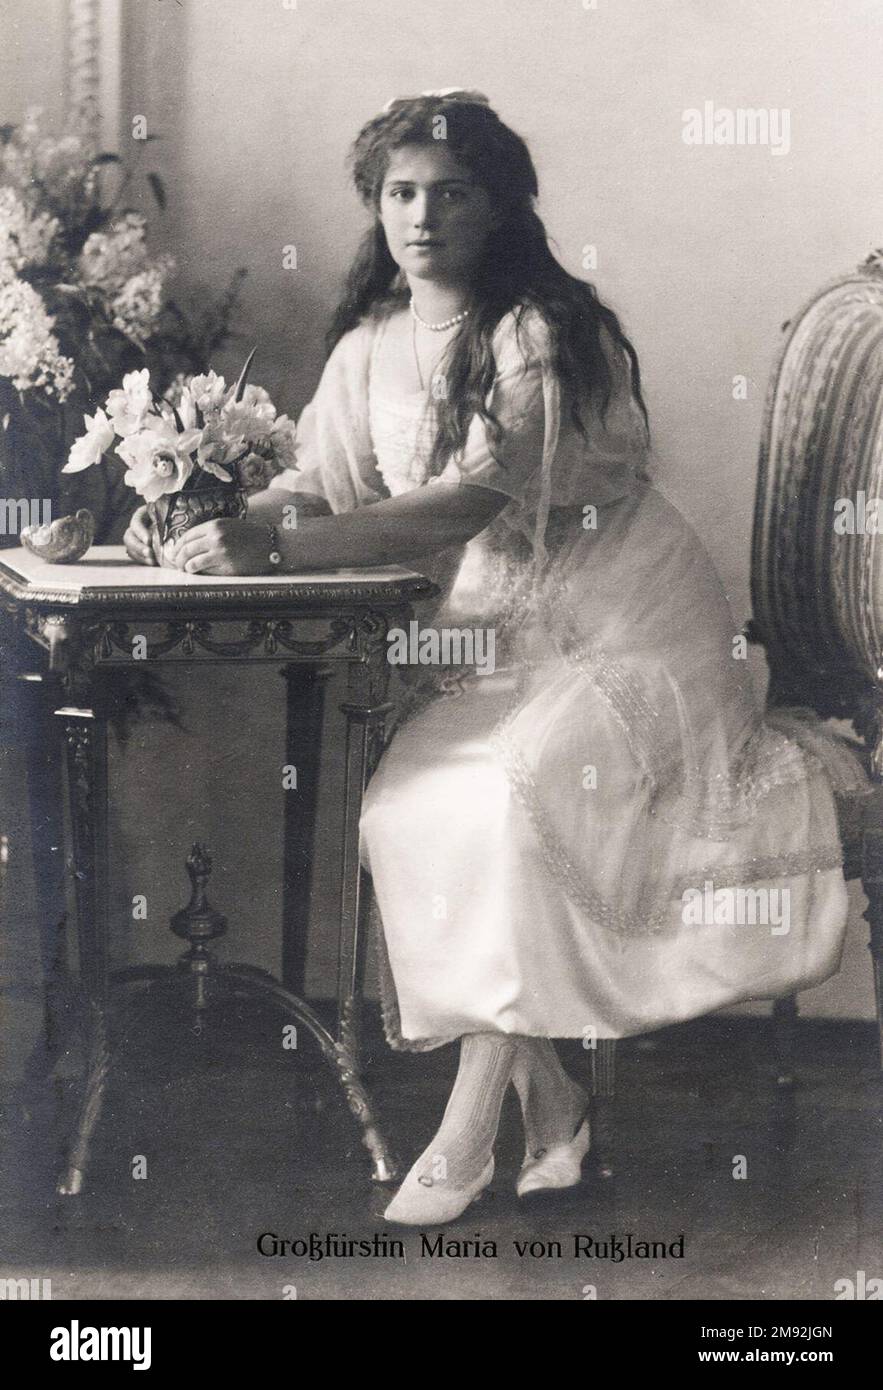 This formal portrait of Grand Duchess Maria Nikolaevna of Russia in 1914 was featured on post cards during World War I  ca.  Winter Palace, 1914 Stock Photo